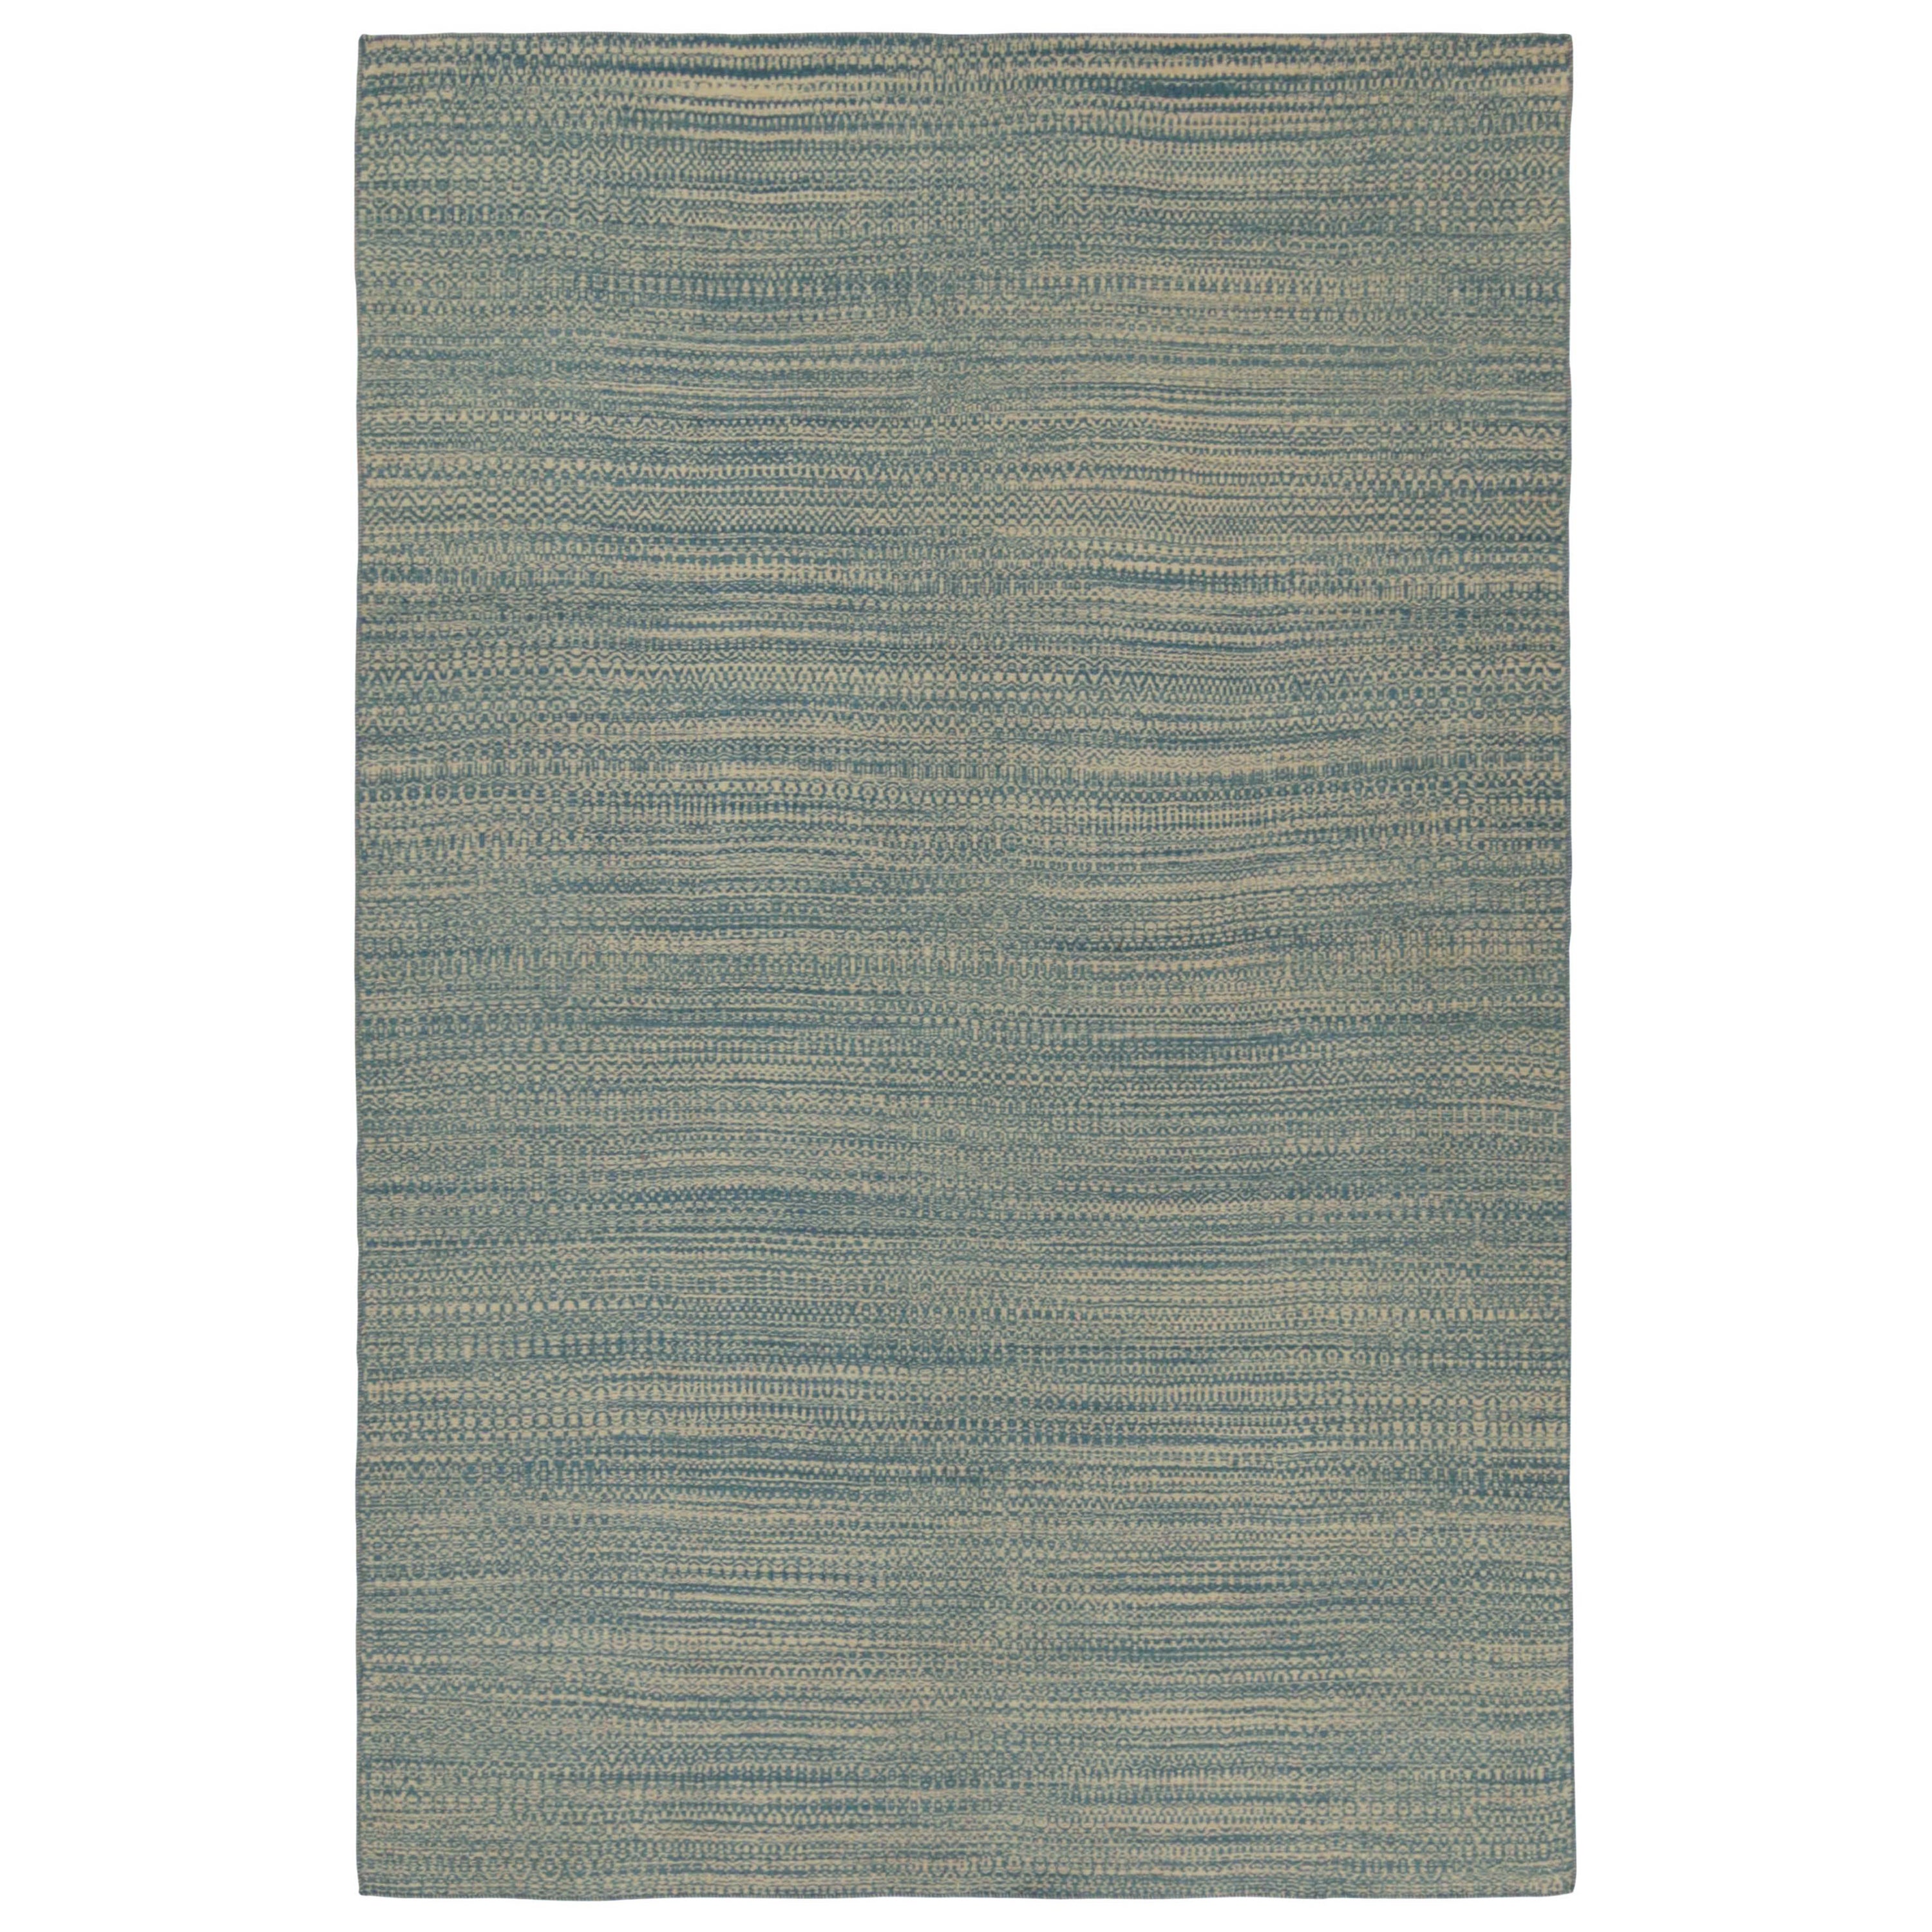 Rug & Kilim’s Contemporary Persian Kilim in Blue and Beige Stripes For Sale